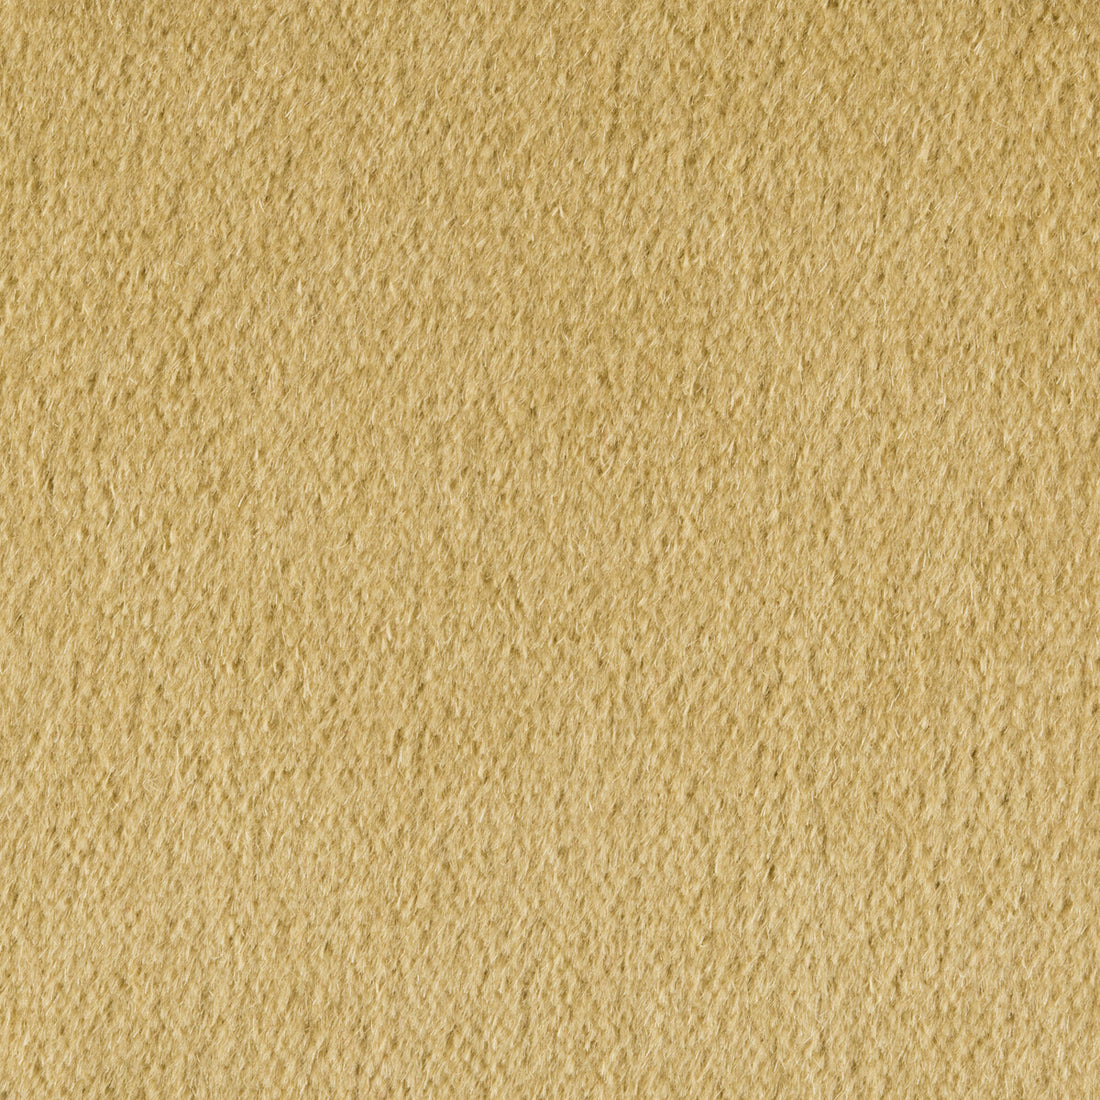 Plazzo Mohair fabric in desert color - pattern 34259.405.0 - by Kravet Couture